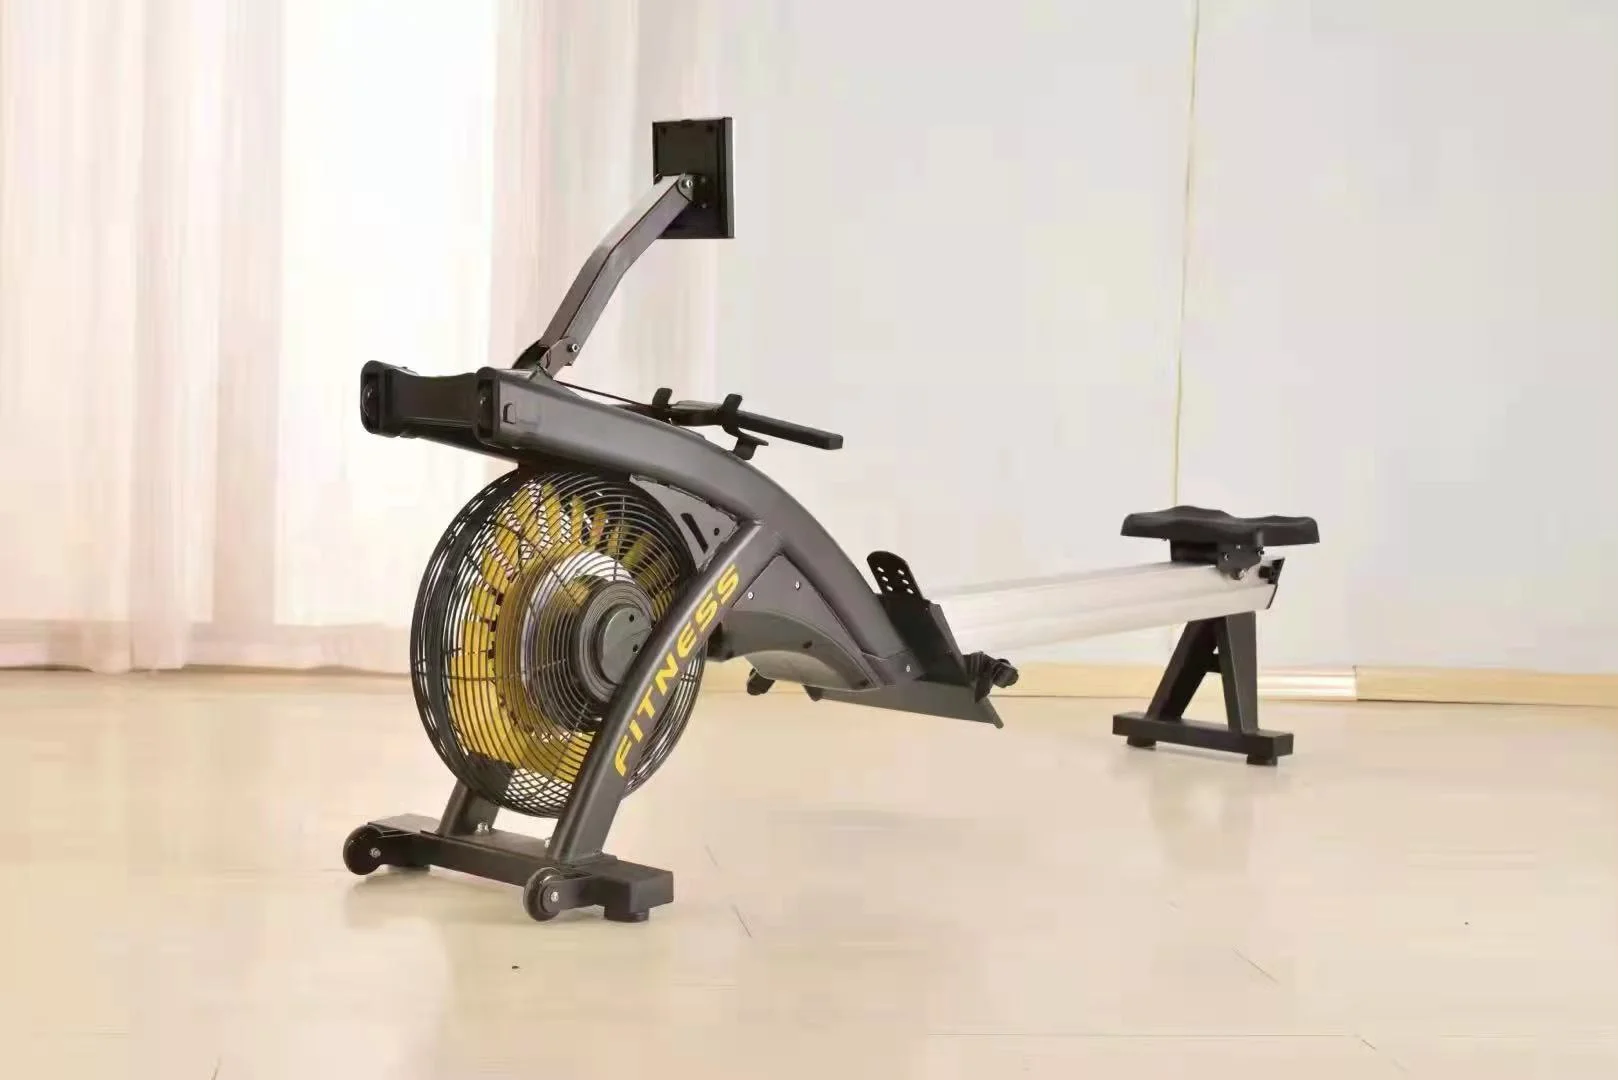 Hot-selling Indoor Fitness Machine Air Rowing Machine Alloy and steel, Aluminum Alloy Commercial Use Body Building